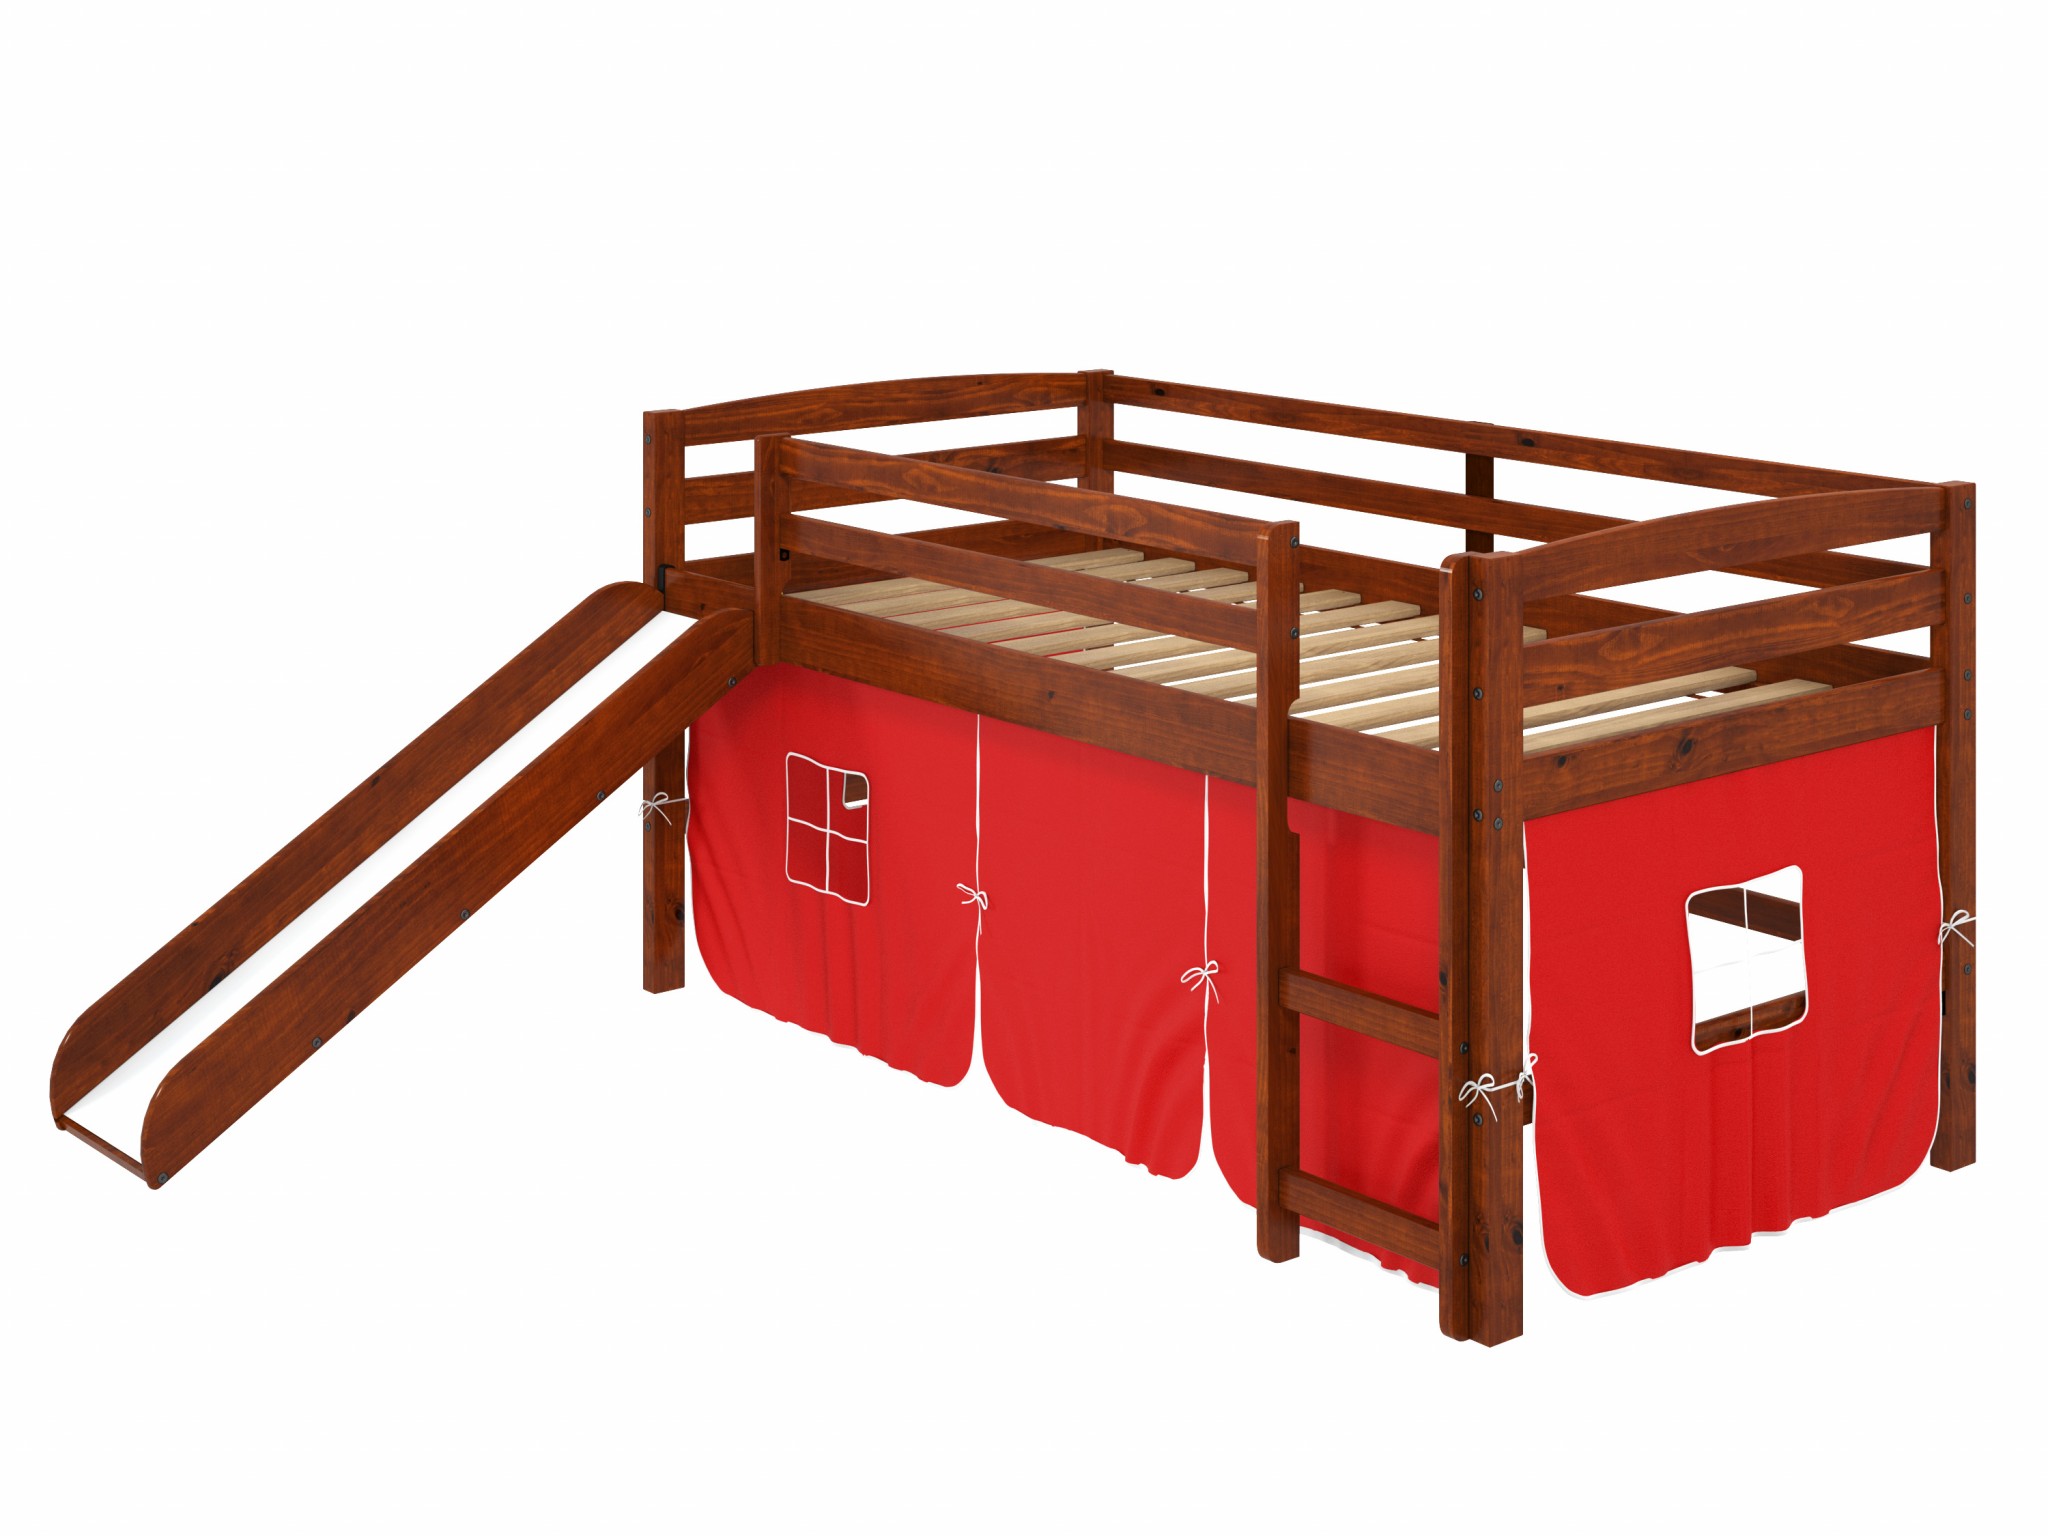 41" X 81" X 46" Chocolate Solid Pine Red Tent Loft Bed with Slide and Ladder